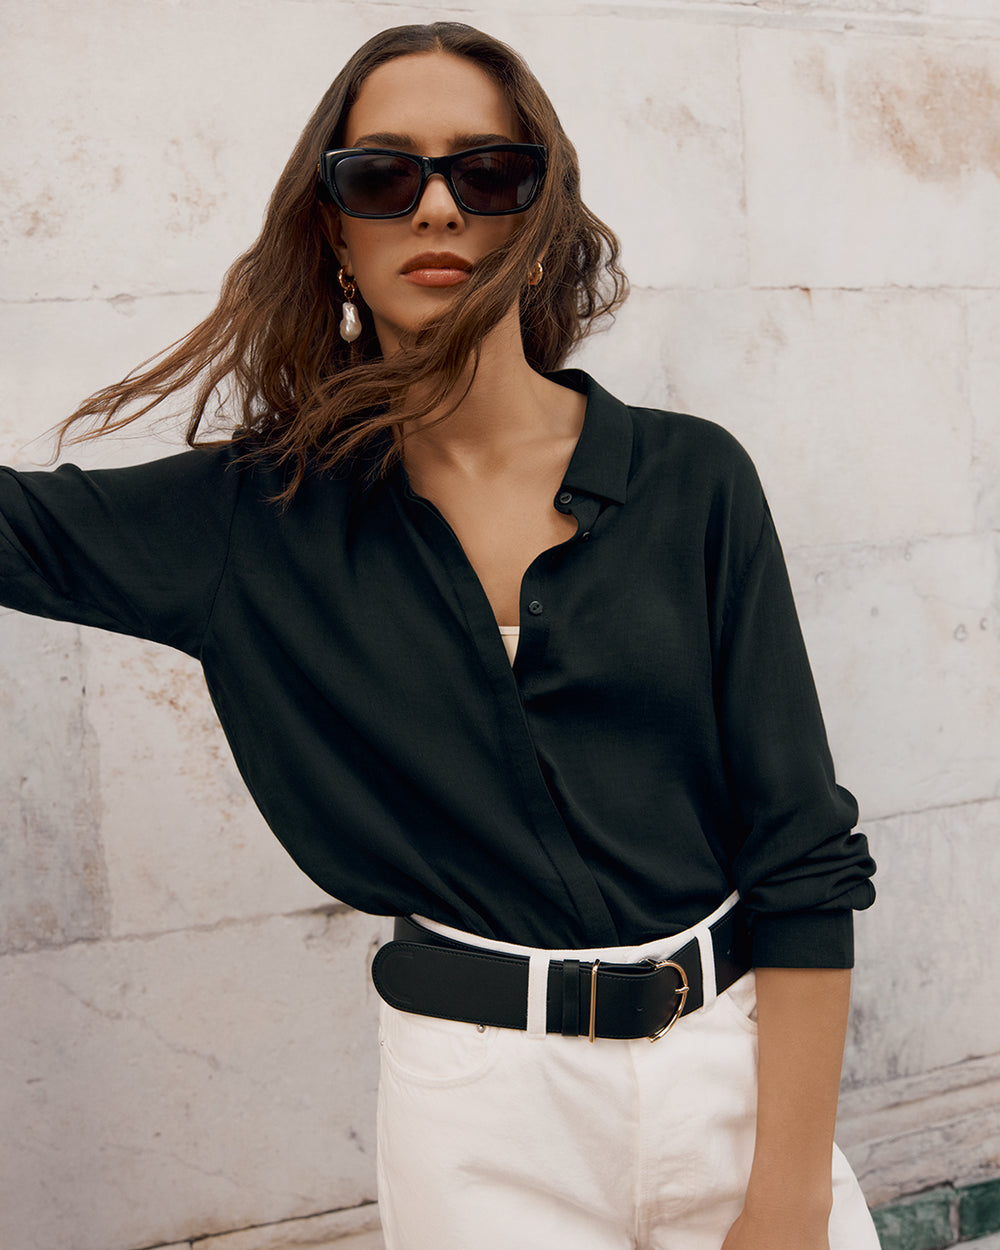 Woman in sunglasses posing with one hand on her hip